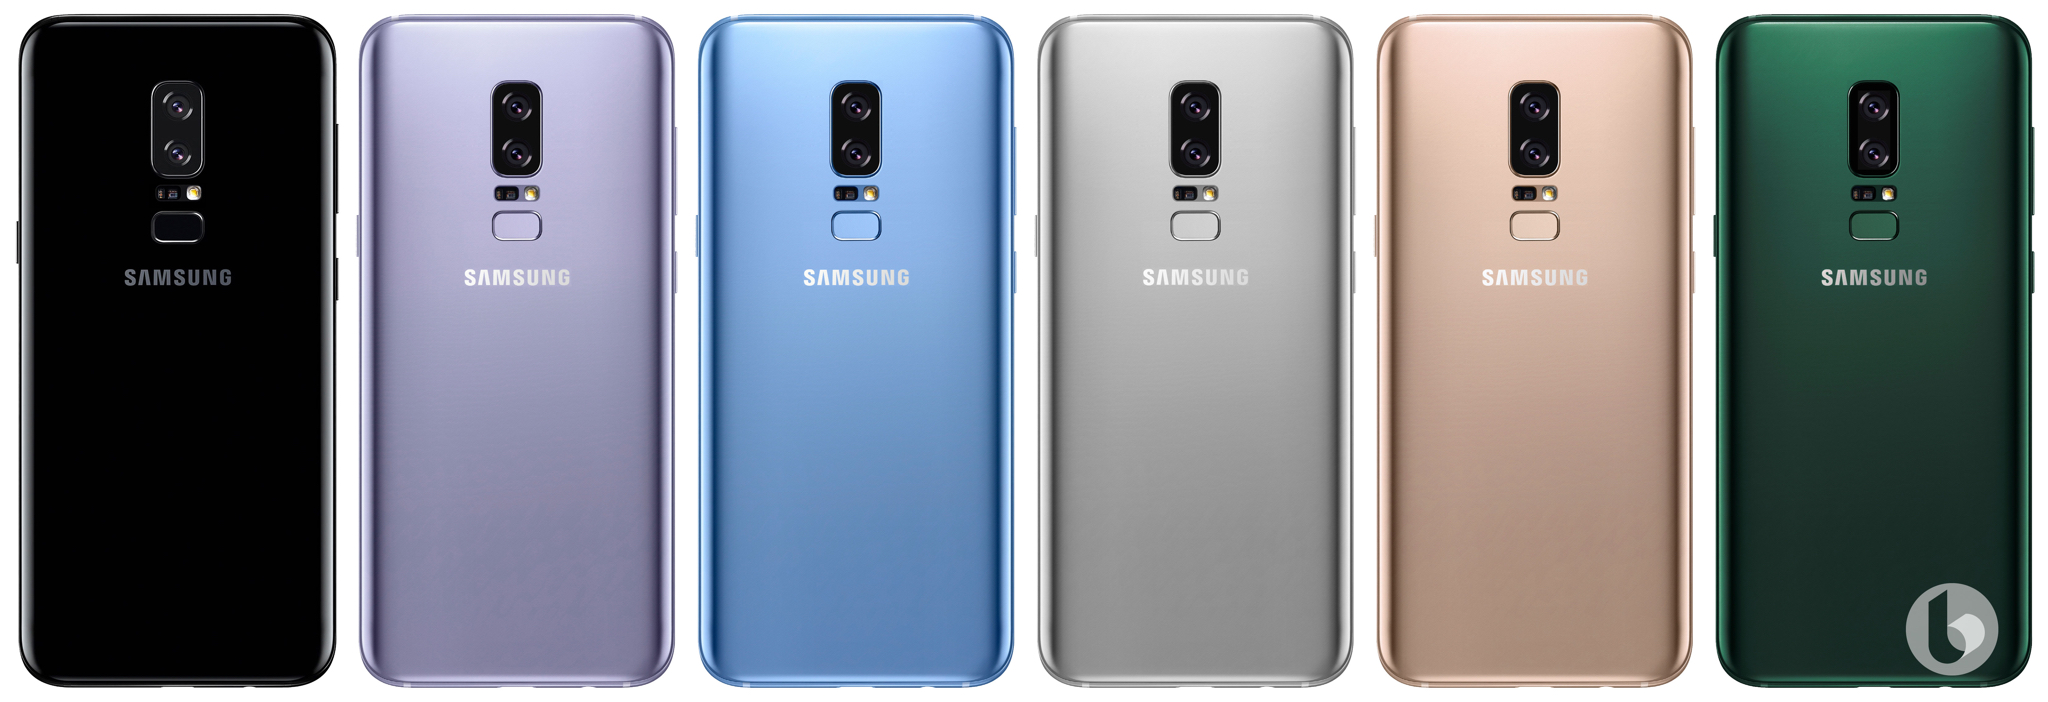 Galaxy-Note-8---artists-renders-with-fingerprint-scanner-at-the-rear.jpg